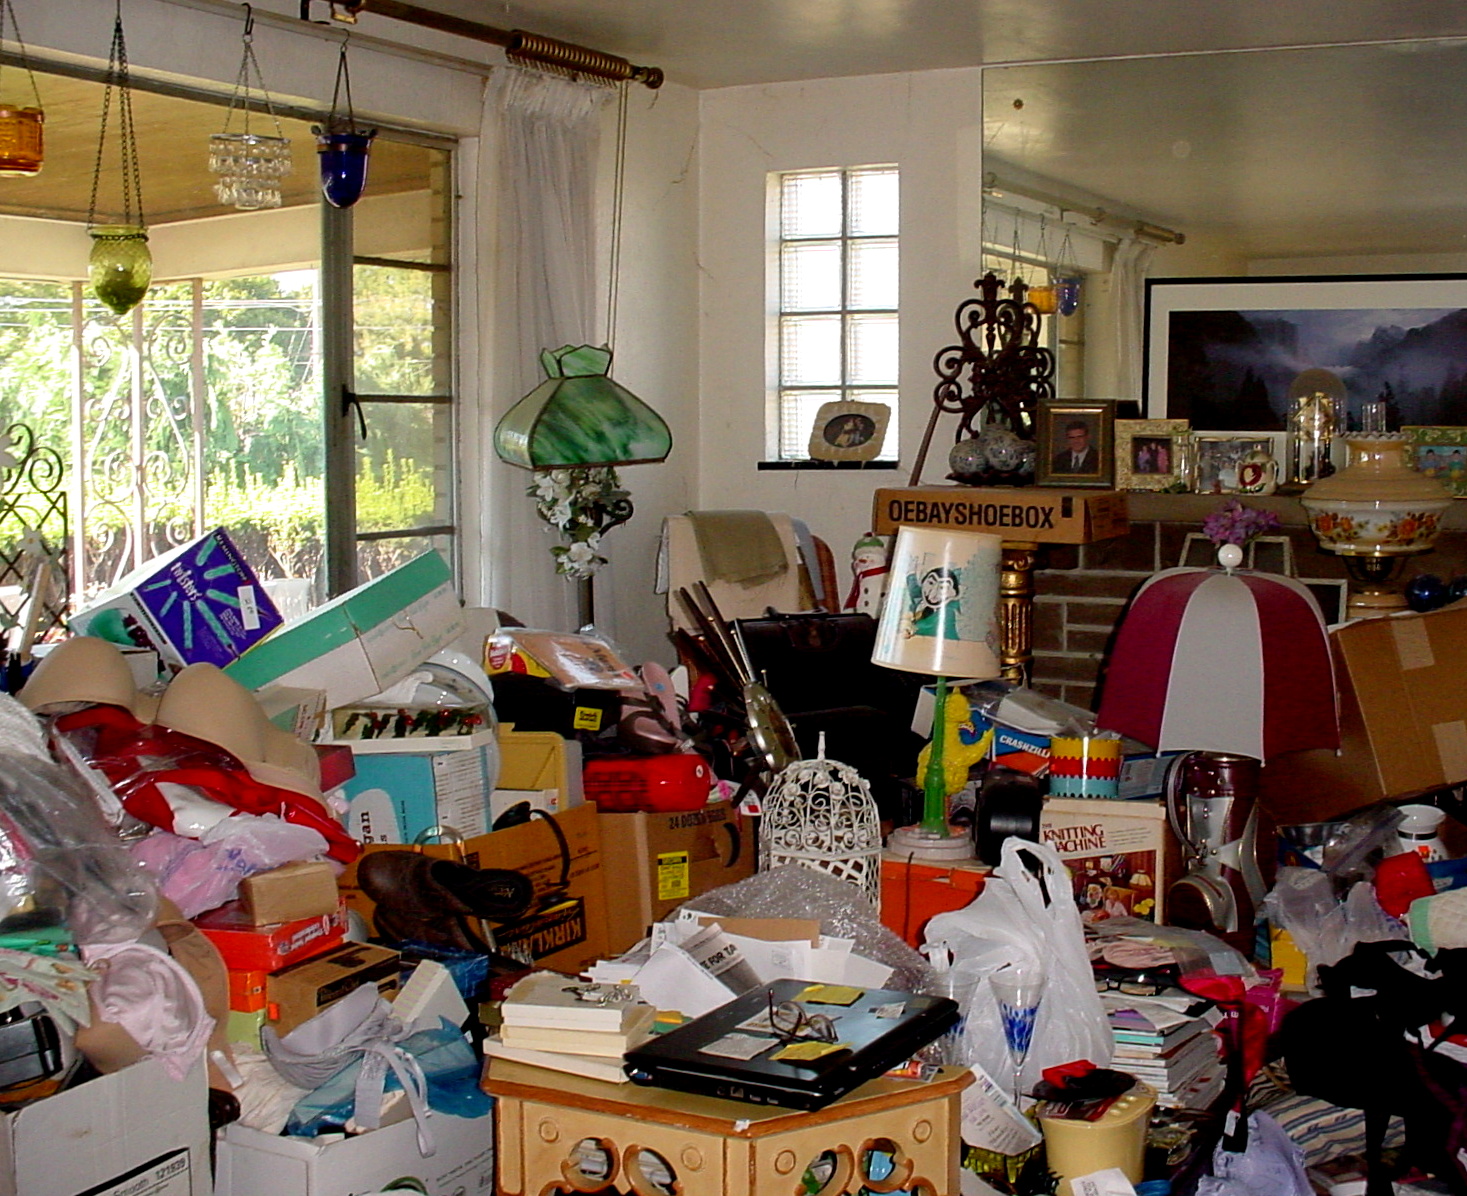 photo of cluttered living room